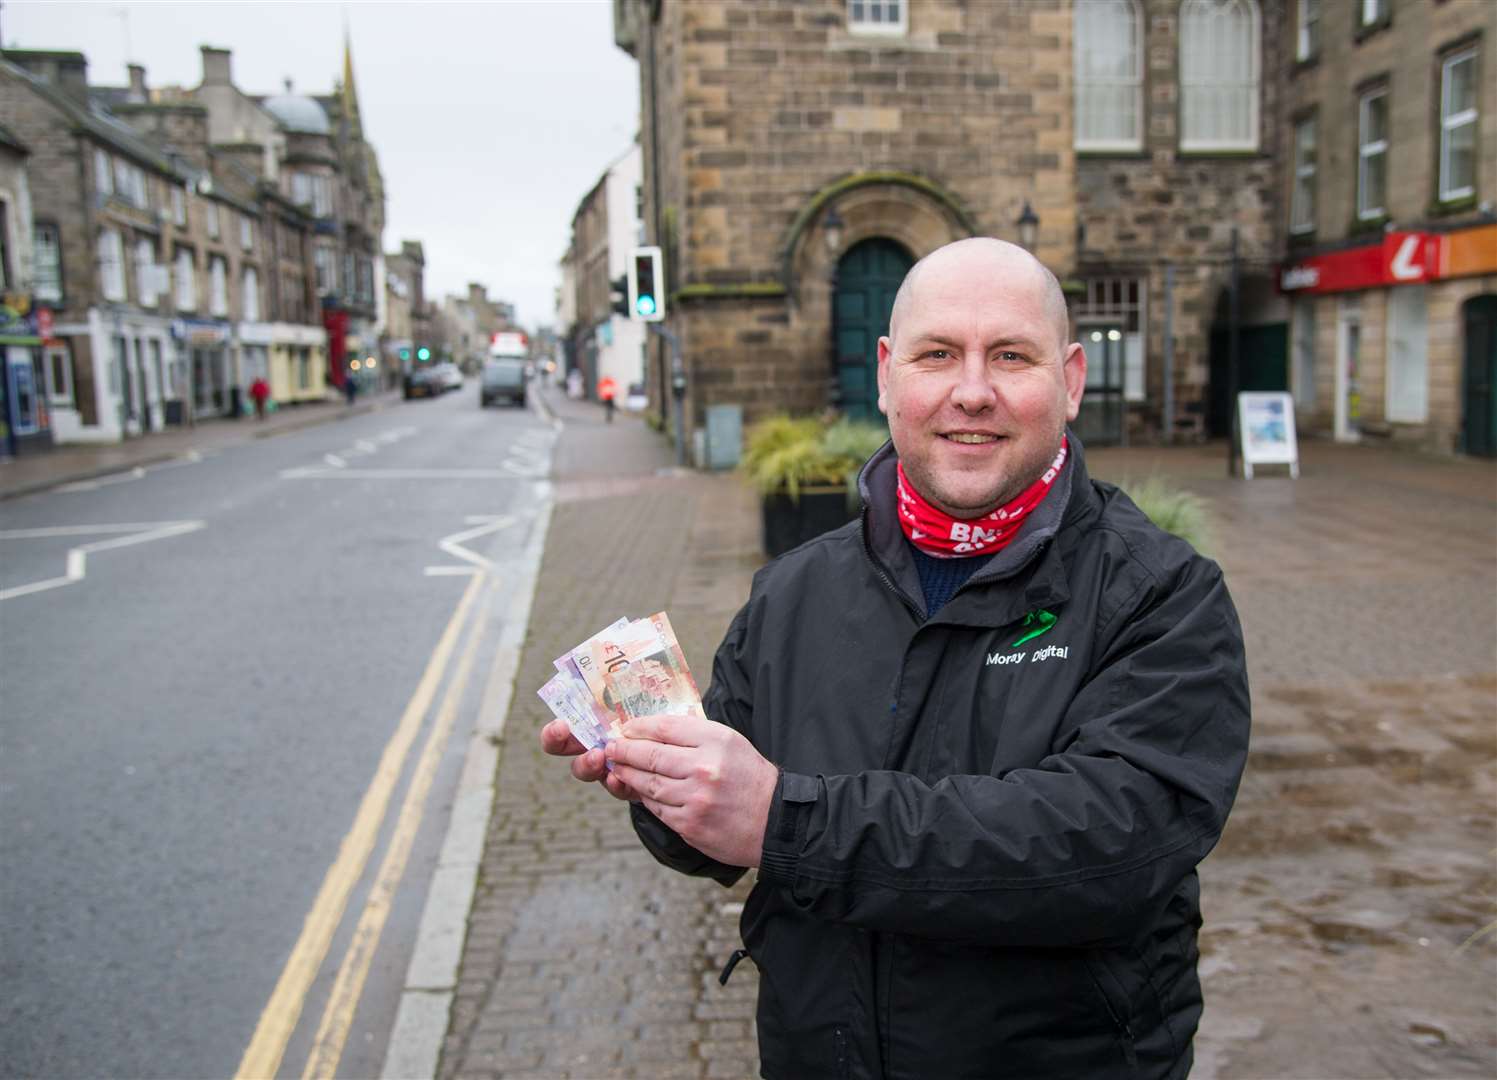 Former chairman Shaun Moat helped Forres Community Council make grants to people in need using £1000 the group received from Scottish and Southern Electricity Networks during the coronavirus pandemic.